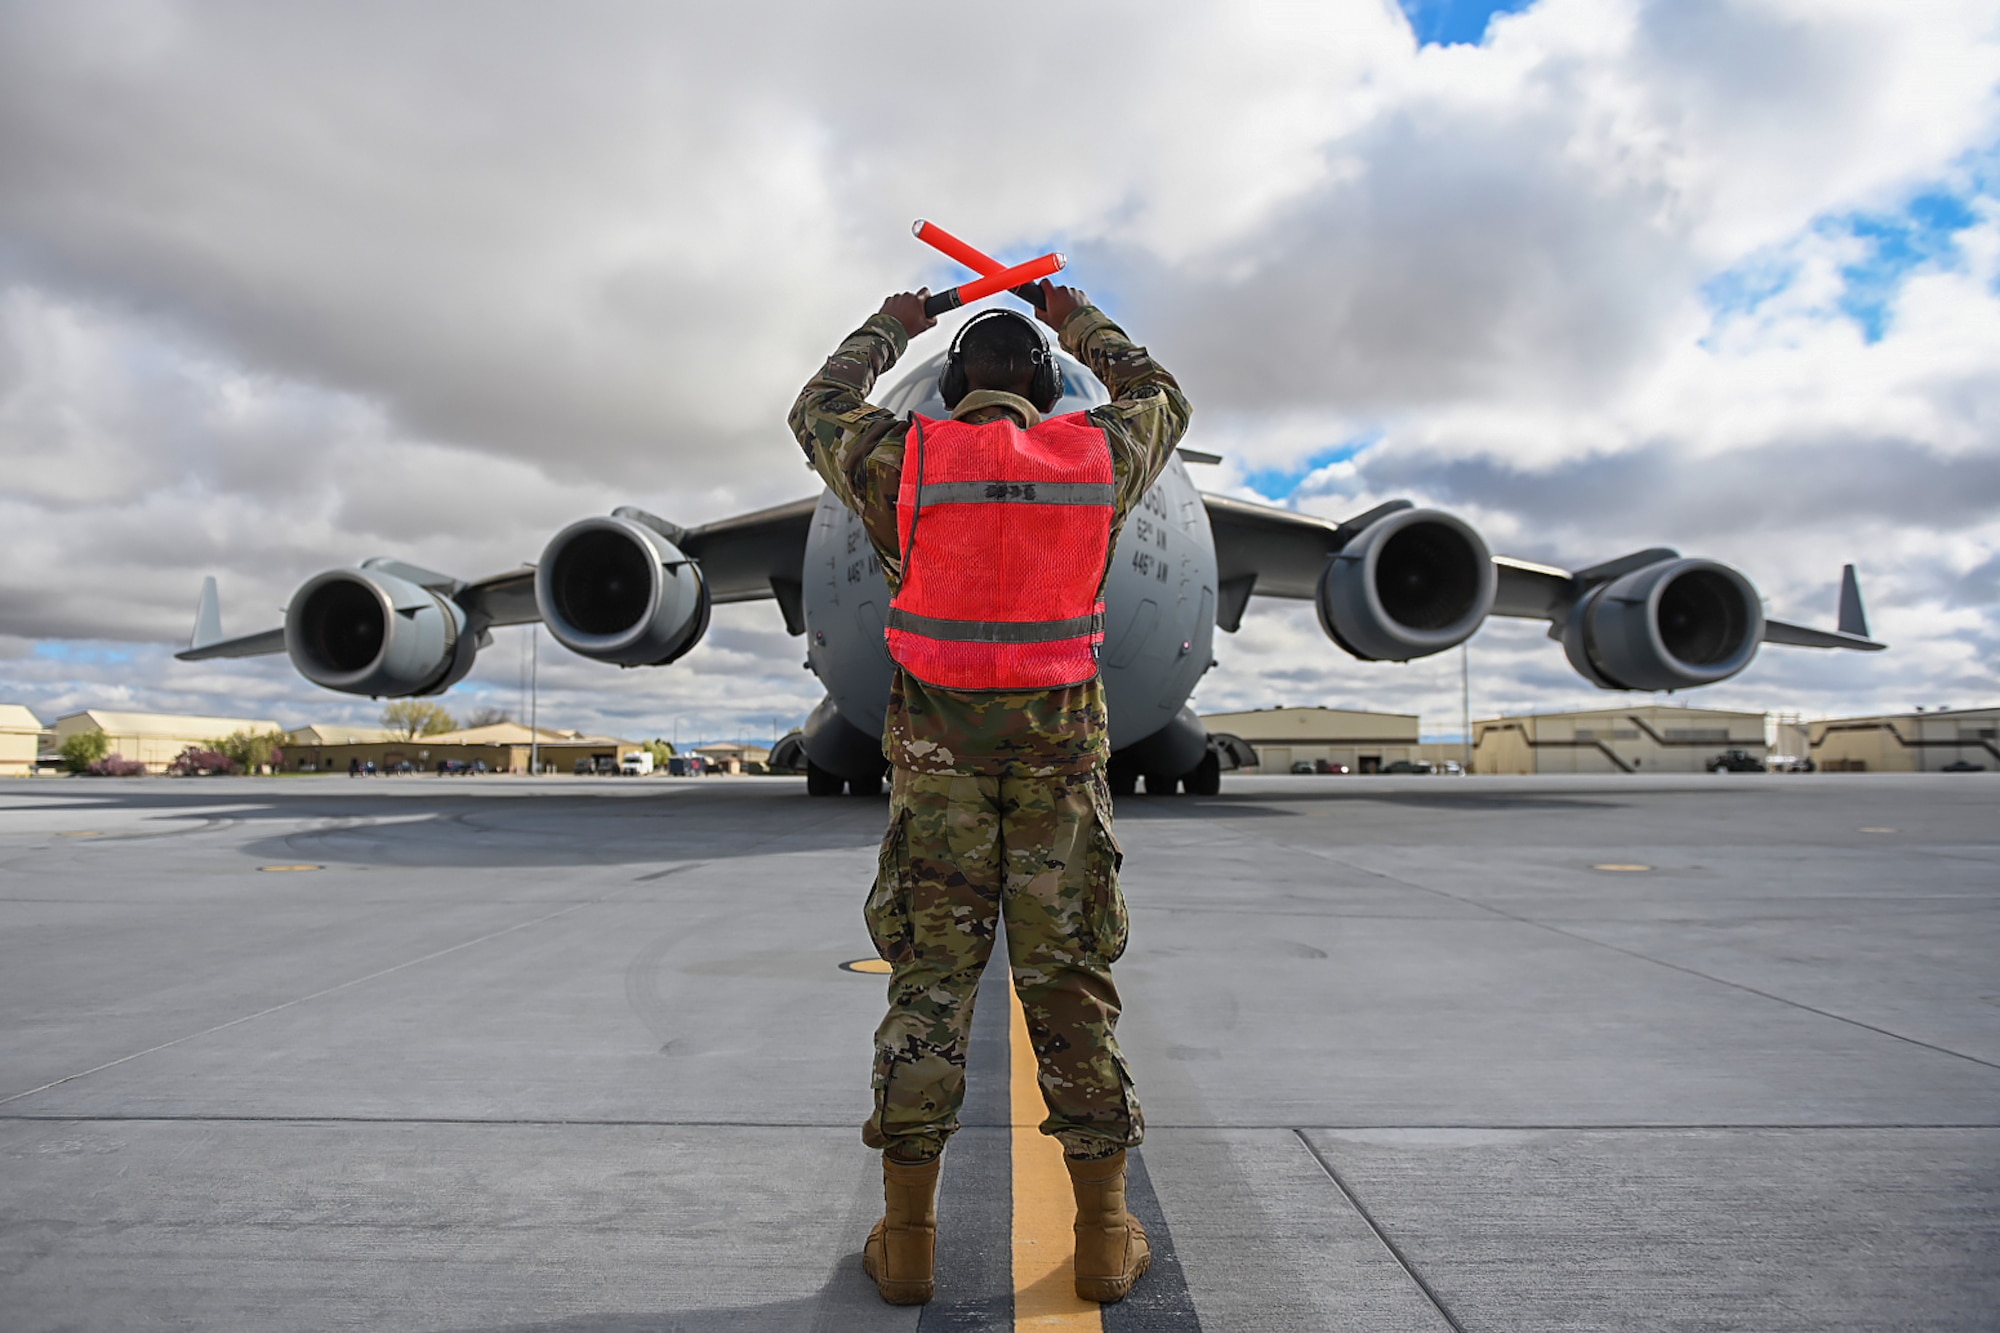 Senior Airman Antoine Barnes, 821st Contingency Response Squadron fire team member, marshals a C-17 Globemaster III from Joint Base Lewis-McChord, Washington, April 27, 2021, on the flight line at Mountain Home AFB, Idaho. Barnes participated in exercise Rainier War, testing his abilities to employ air combat capabilities during a time of potentially imminent foreign aggression. (U.S. Air Force photo by Staff Sgt. Christian Conrad)